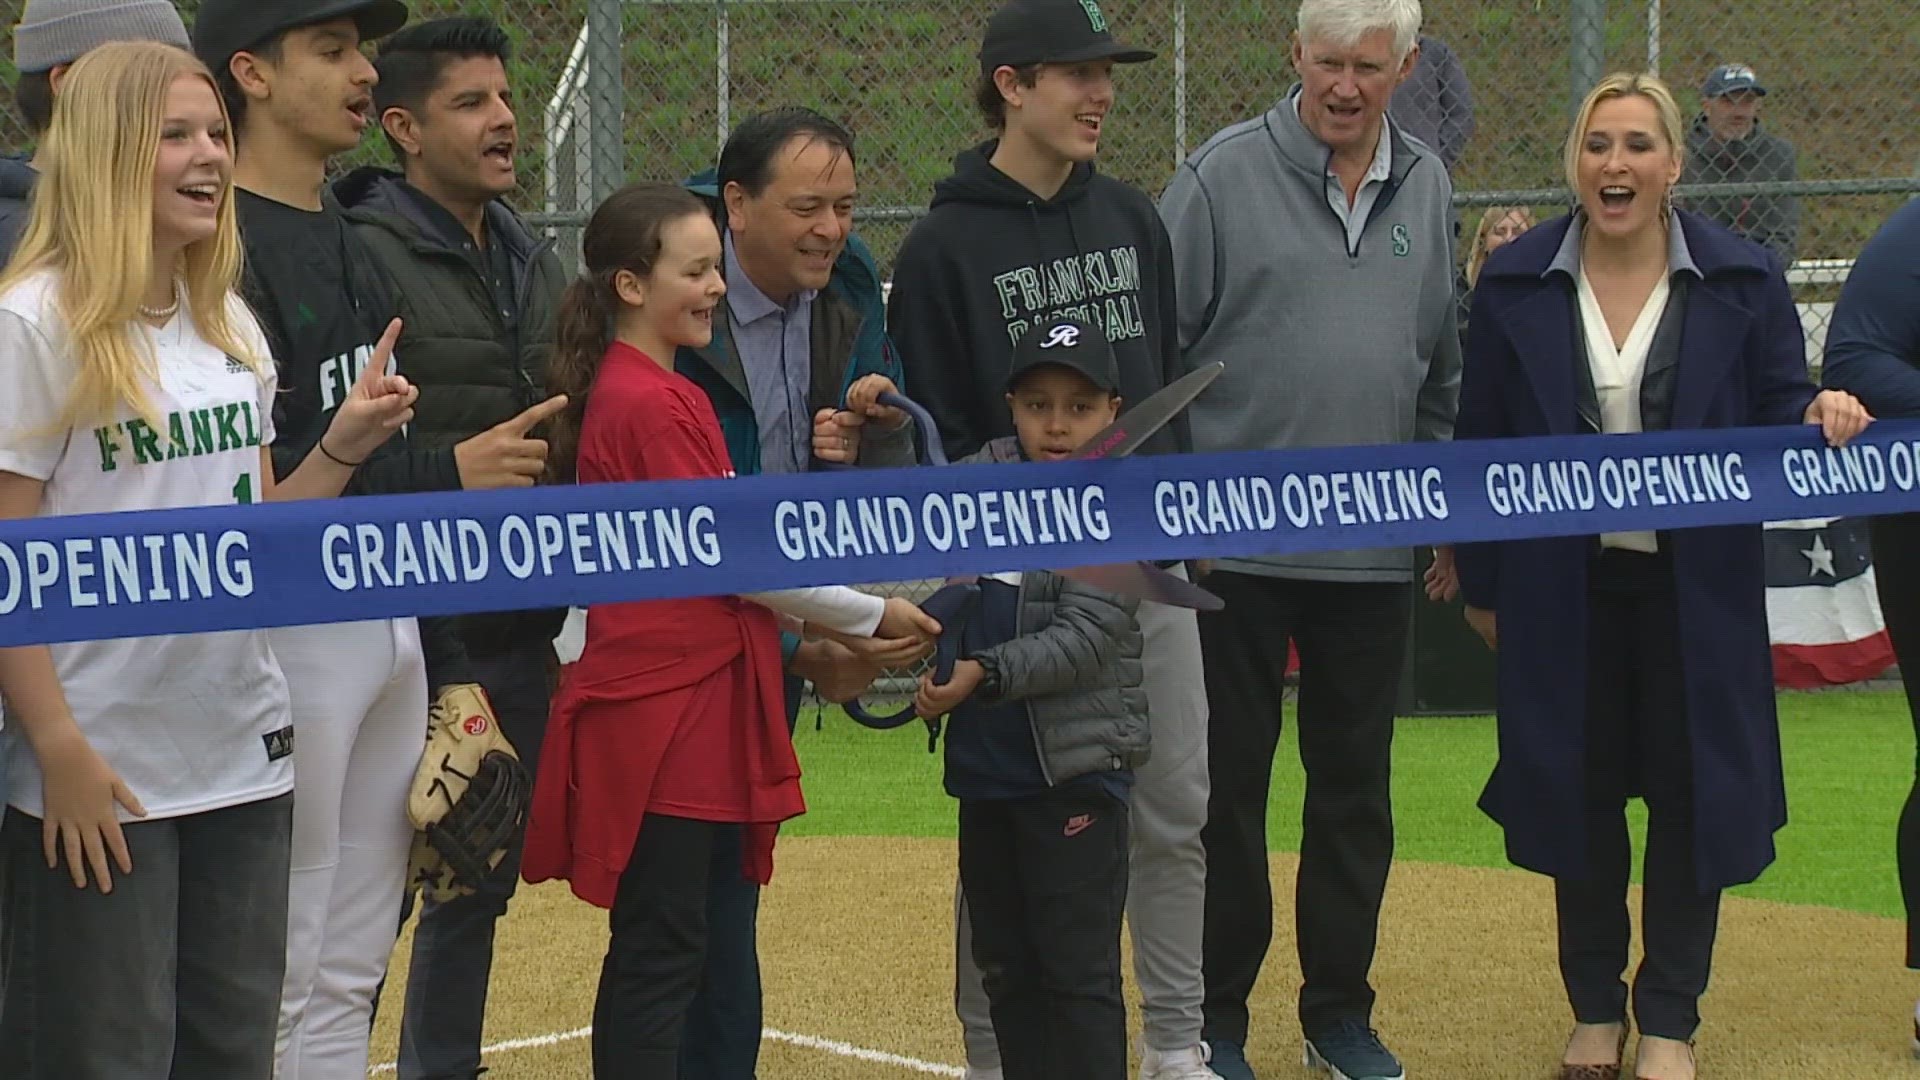 This Rainier Playfield renovation is one of four All-Star Legacy Initiative projects to make baseball more equitable and accessible in the Seattle area.